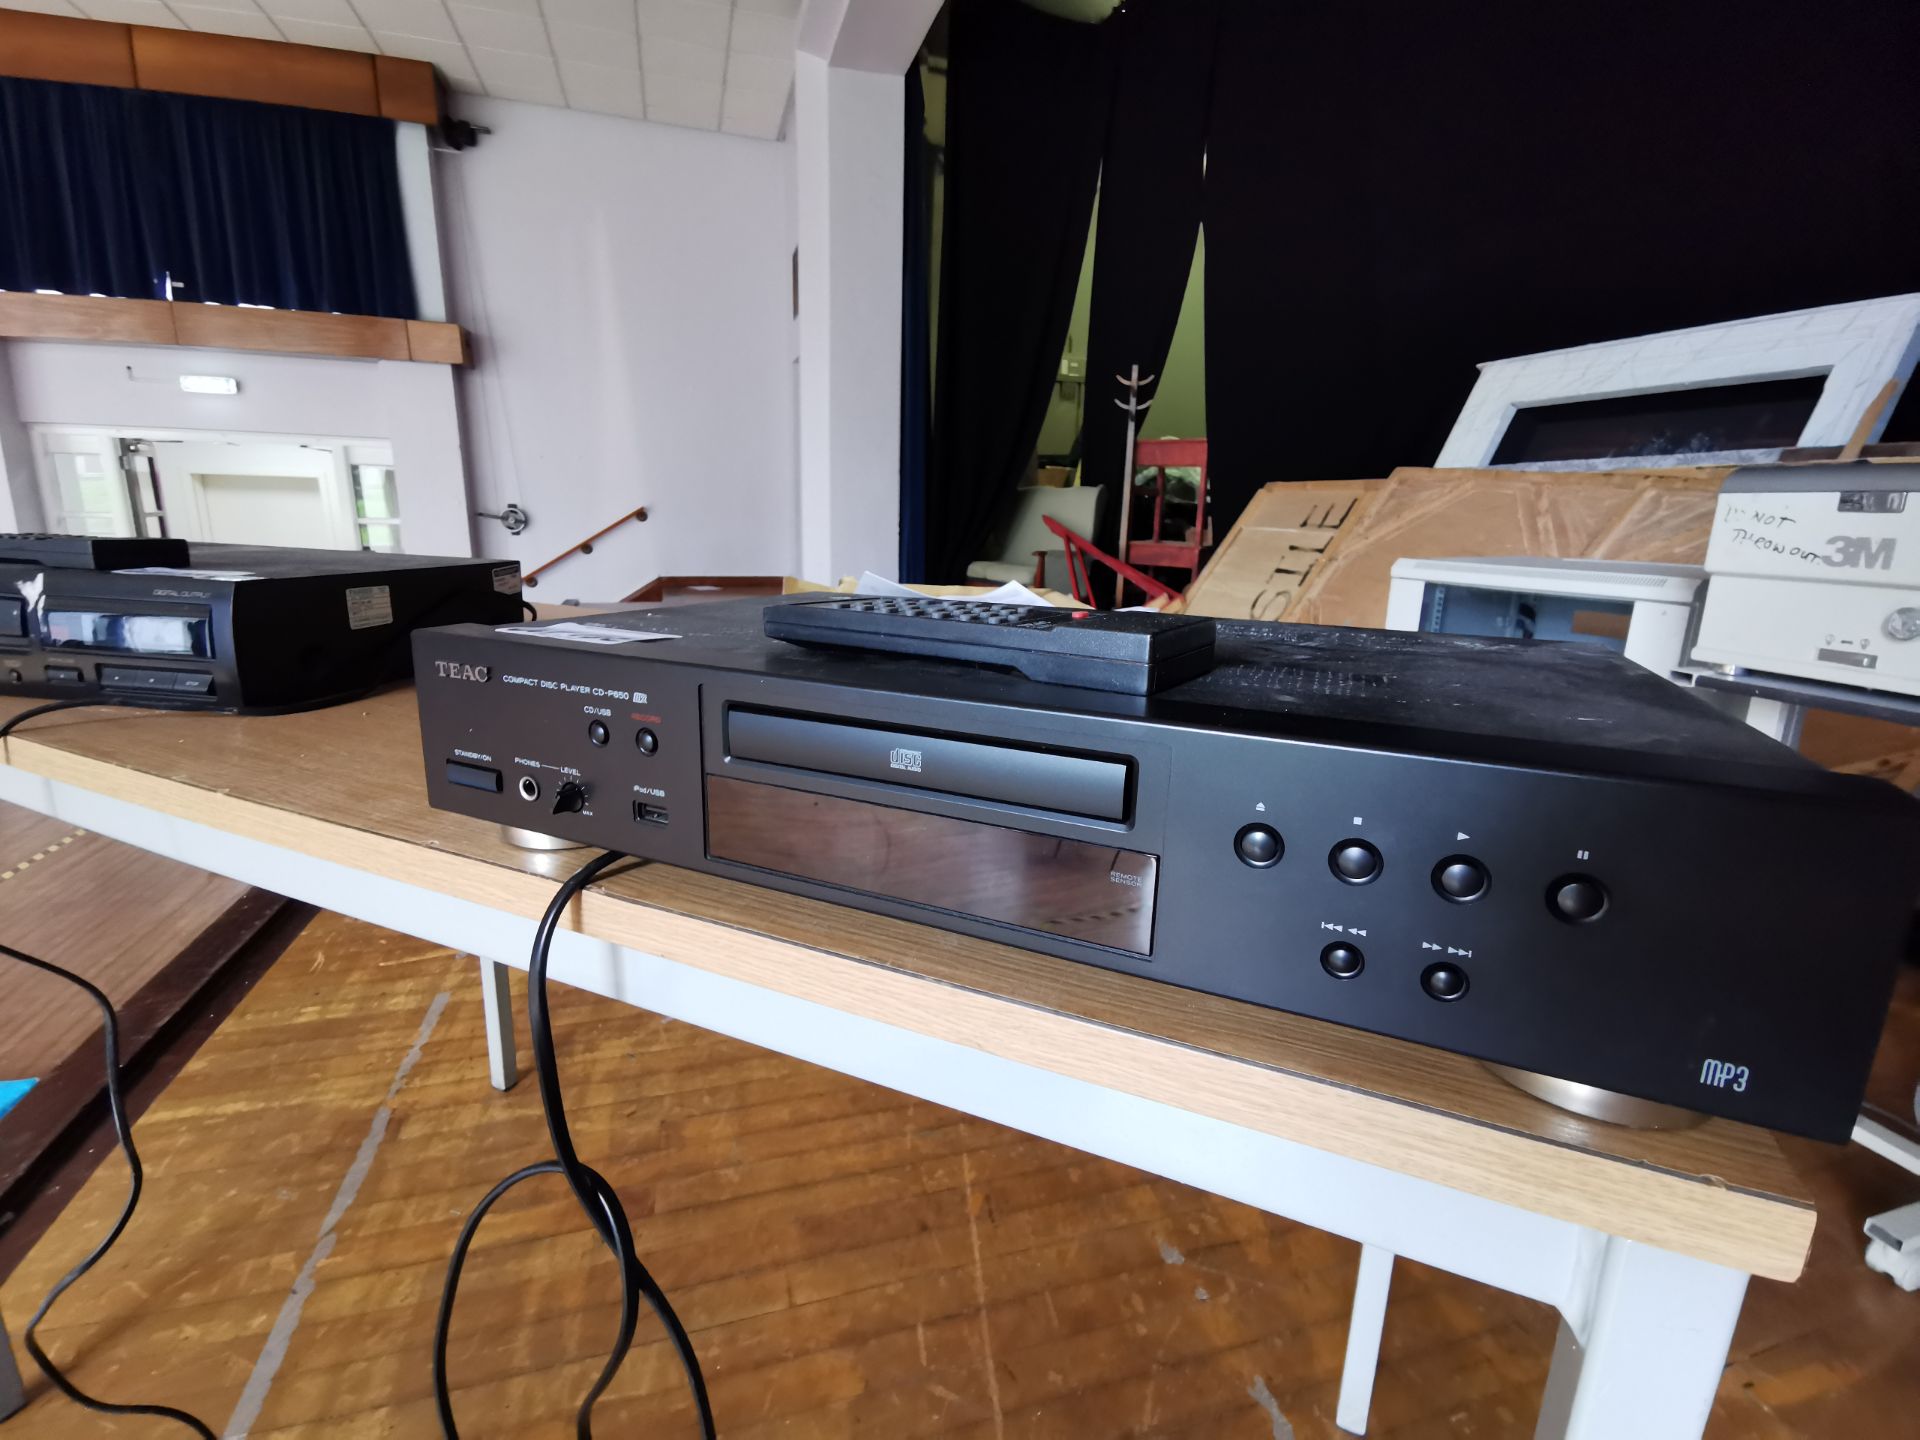 Teac compack disk player